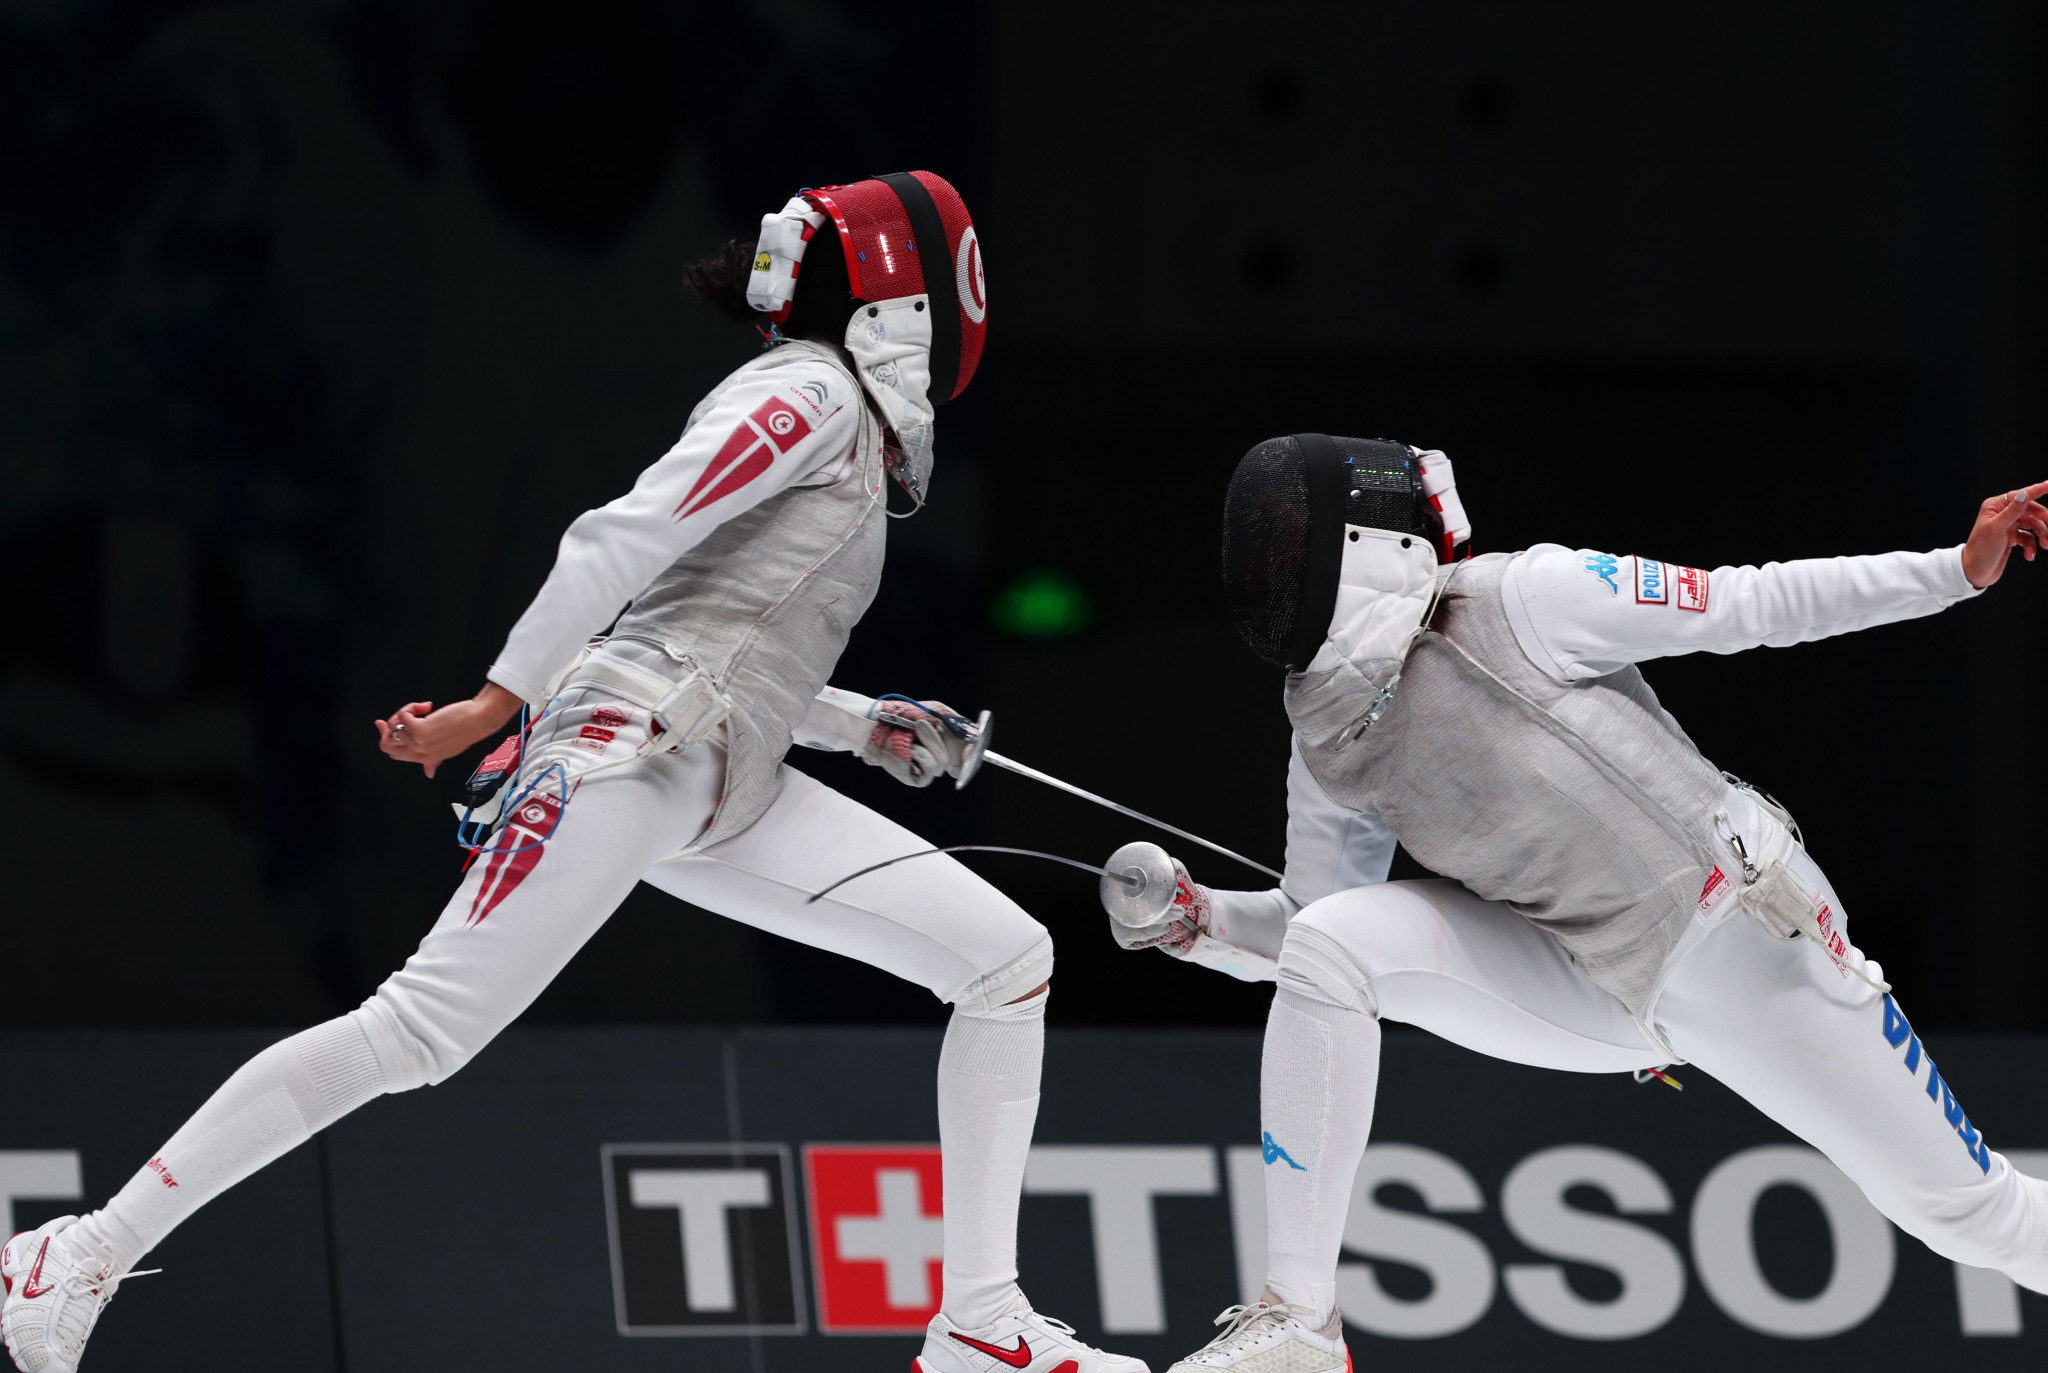 Rio 2016 Olympic bronze medallist Inès Boubakri claimed the women’s foil title as action continued today at the African Fencing Championships in Bamako ©Getty Images